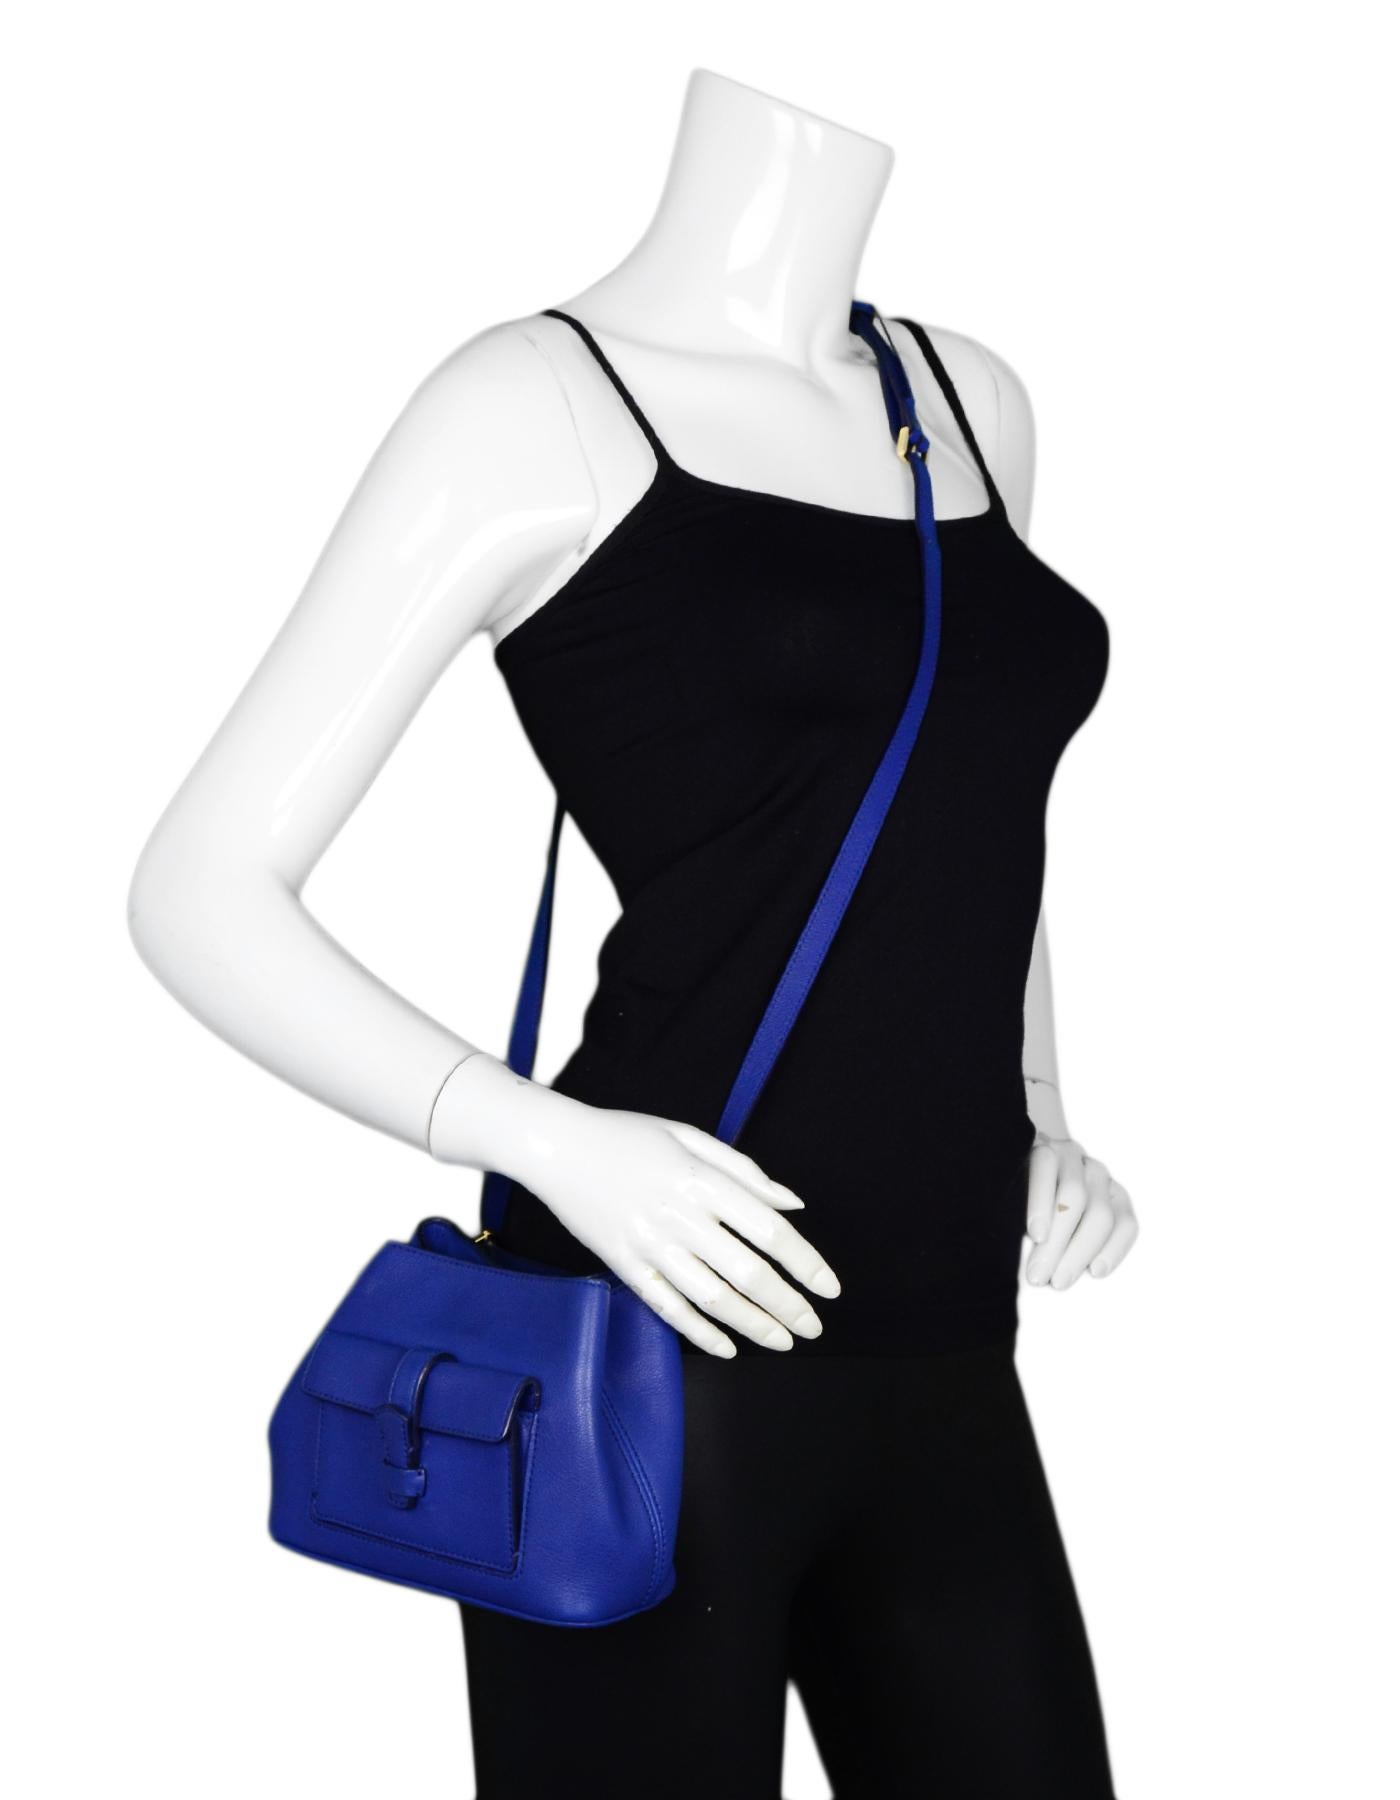 Loro Piana Cobalt Blue Leather Globe Bandouliere Crossbody Bag

Made In: Italy
Color: Cobalt blue
Hardware: Goldtone
Materials: Leather
Lining: Blue leather
Closure/Opening: Snap closure
Exterior Pockets: Front facing pocket with slide through